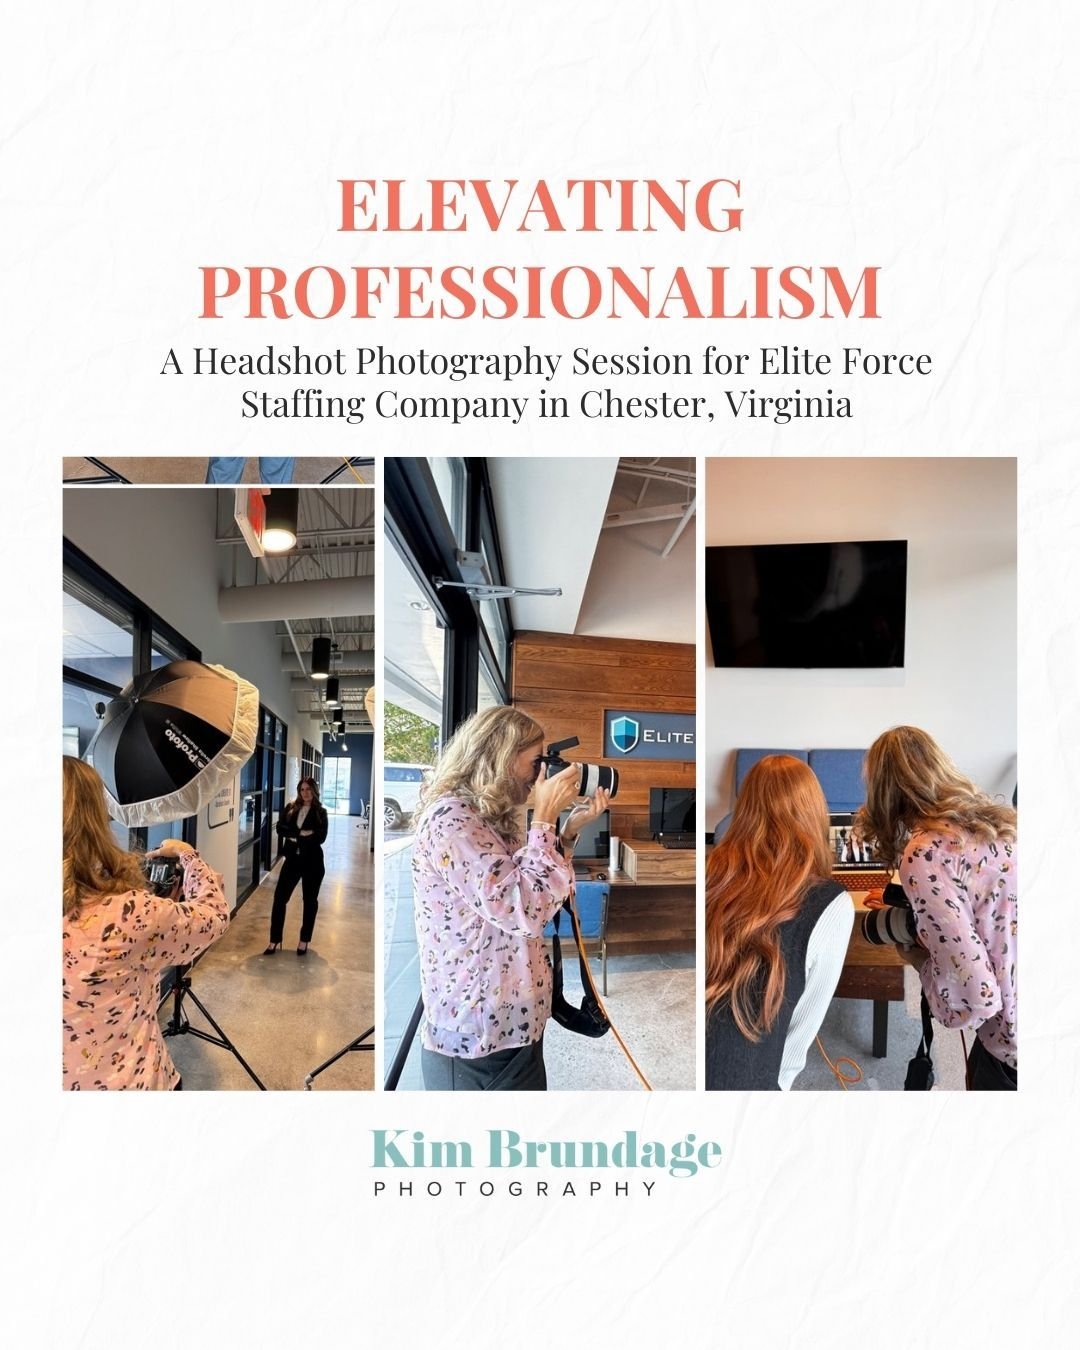 Elevating professionalism with Elite Force Staffing Company! 💼

Their dedication to excellence shines through in every team member's headshot. From makeup to wardrobe styling, each detail is carefully crafted to convey confidence and professionalism